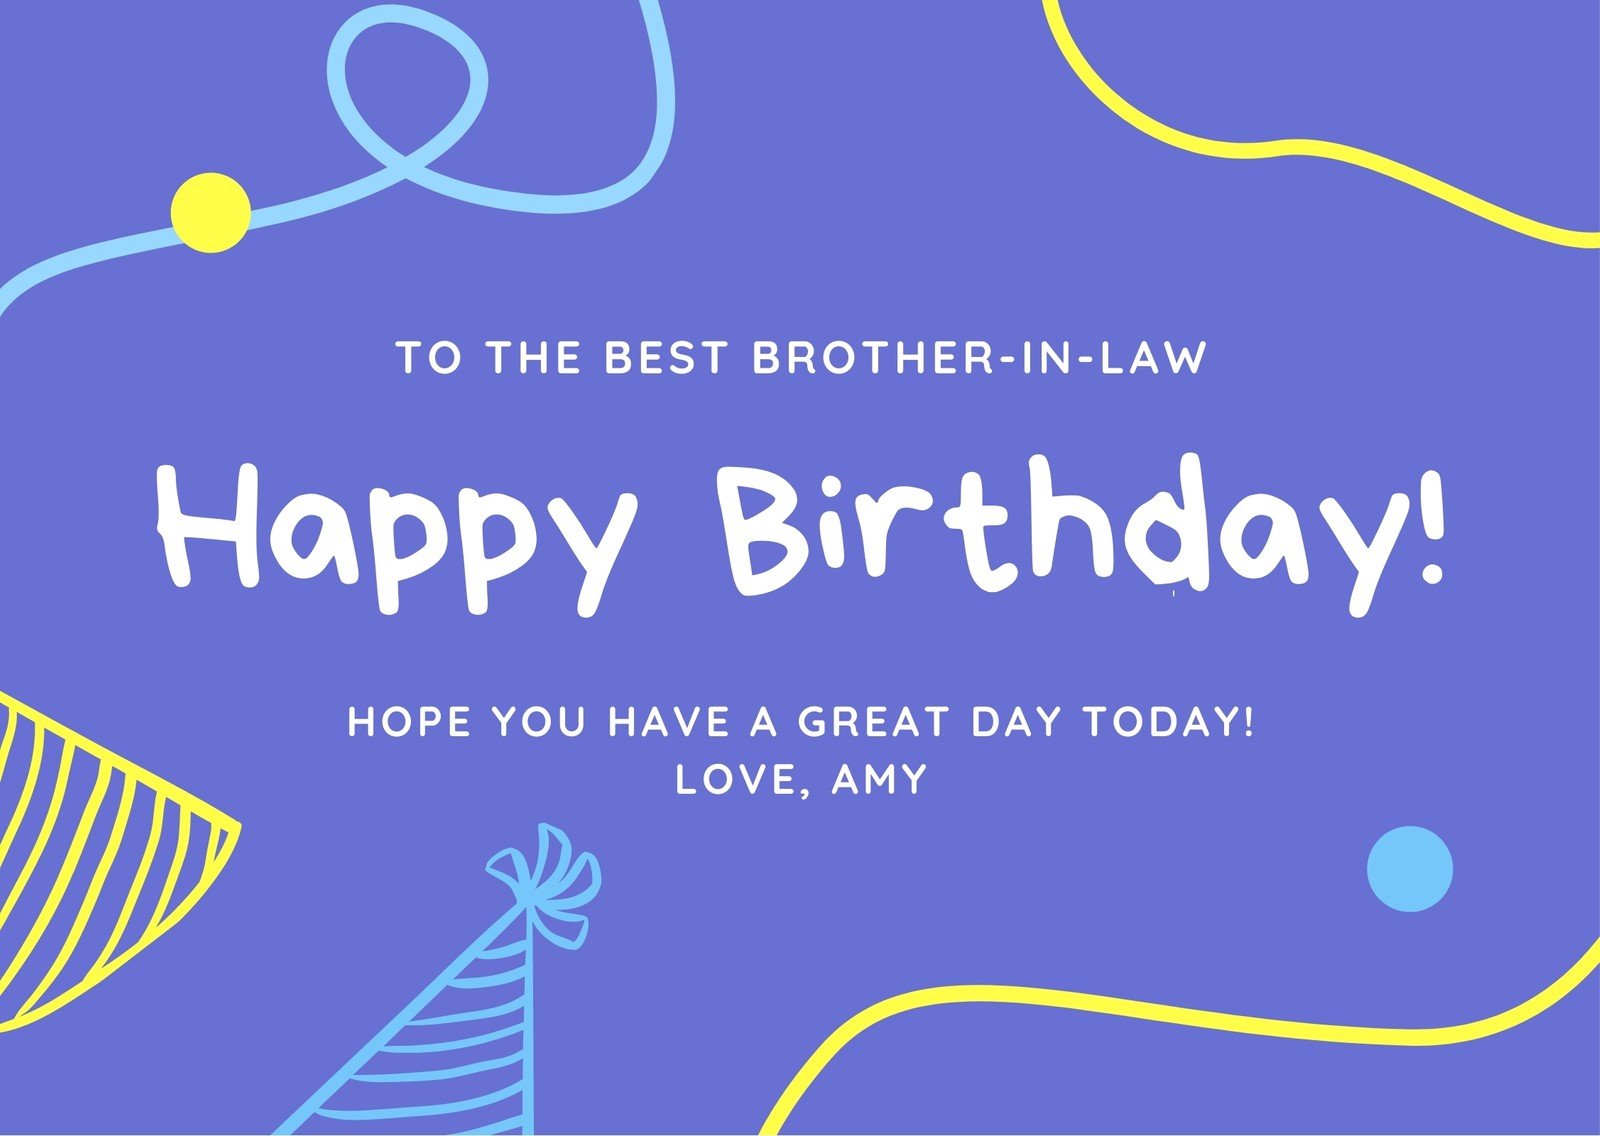 Yellow Teal Brother in Law Birthday Card - Templates by Canva